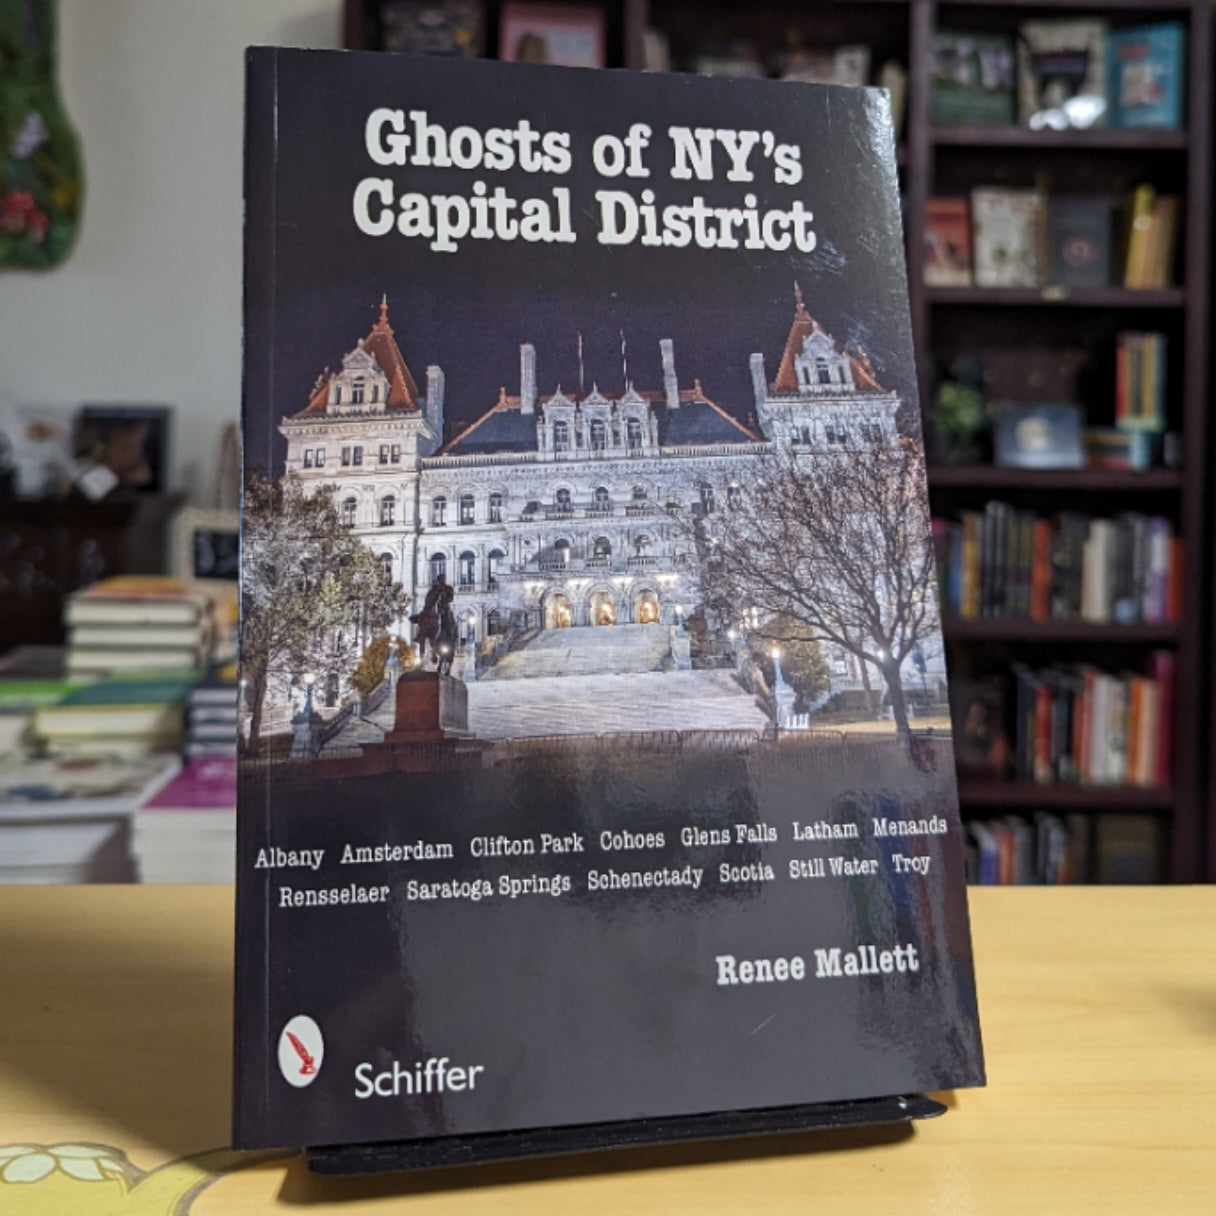 Ghosts of Ny's Capital District: Albany, Schenectady, Troy & More